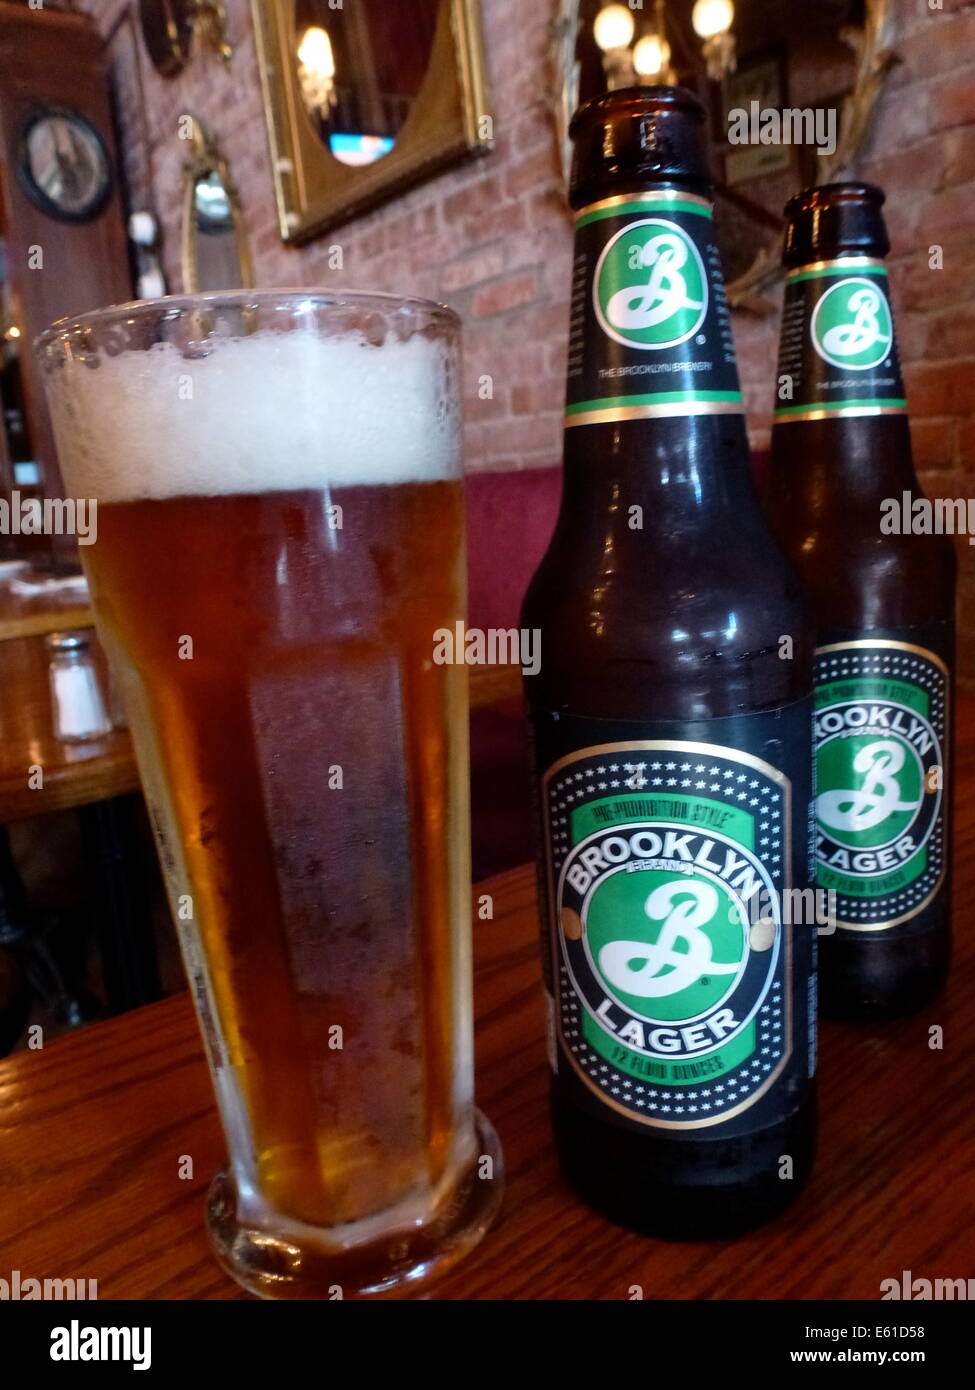 A beer glass and beer bottles with Brooklyn Lager Beer of the Brooklyn Brewery in New York, USA, 24 June 2014. The logo of the brewery was designed by Milton Glaser, who also designed the 'I love NY' logo. Photo: Alexandra Schuler/dpa - ATTENTION! NO WIRE SERVICE - Stock Photo